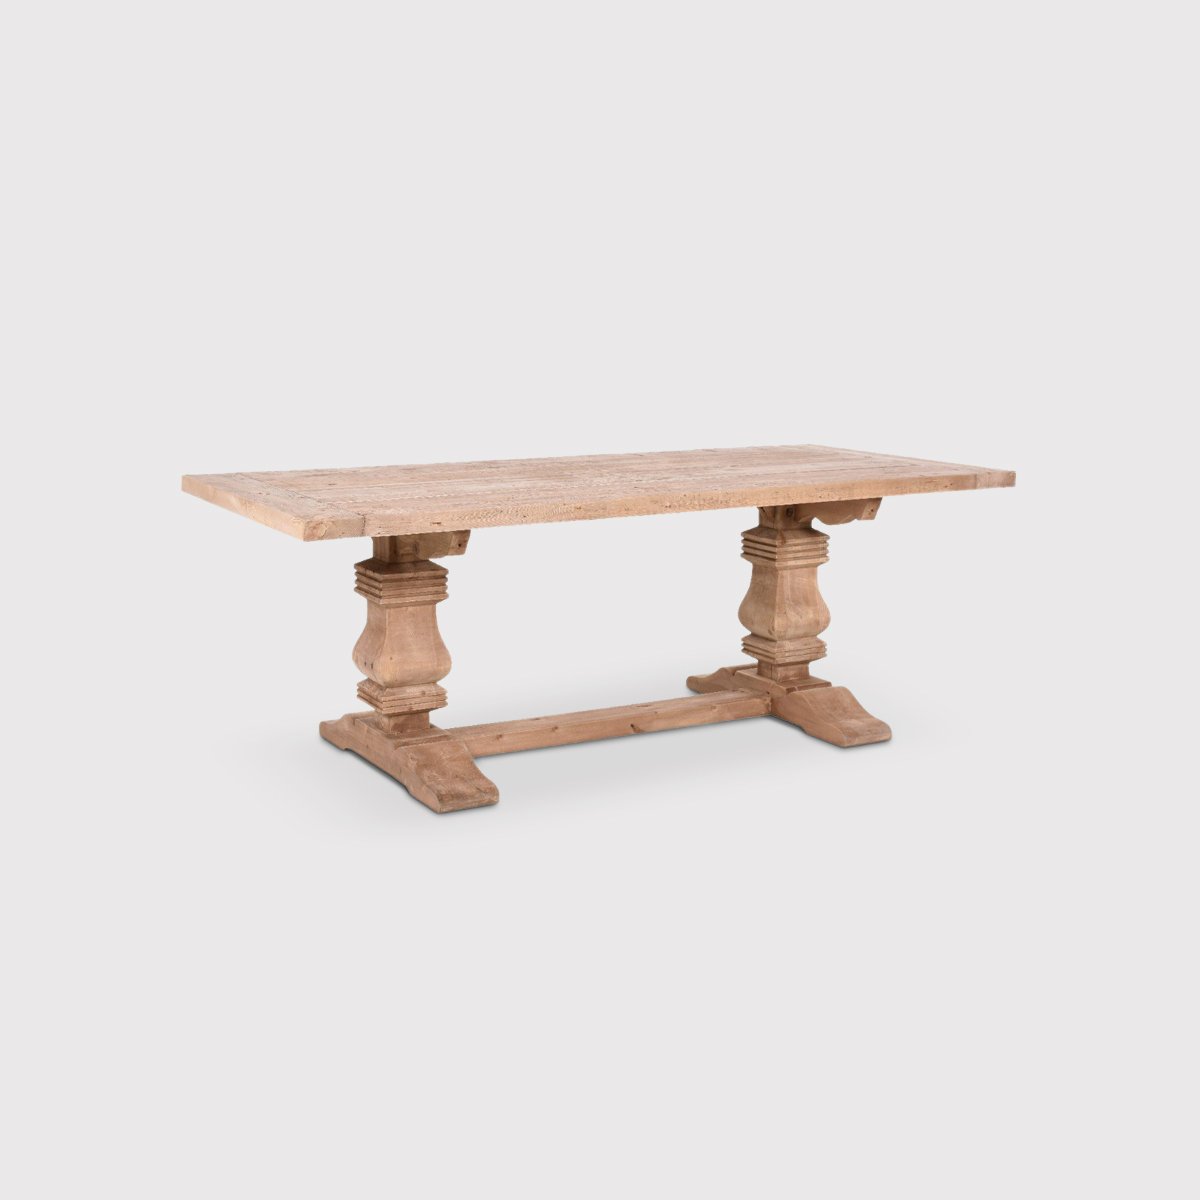 Timothy Oulton Georgian Architectural Dining Table Small, Neutral Wood | Barker & Stonehouse